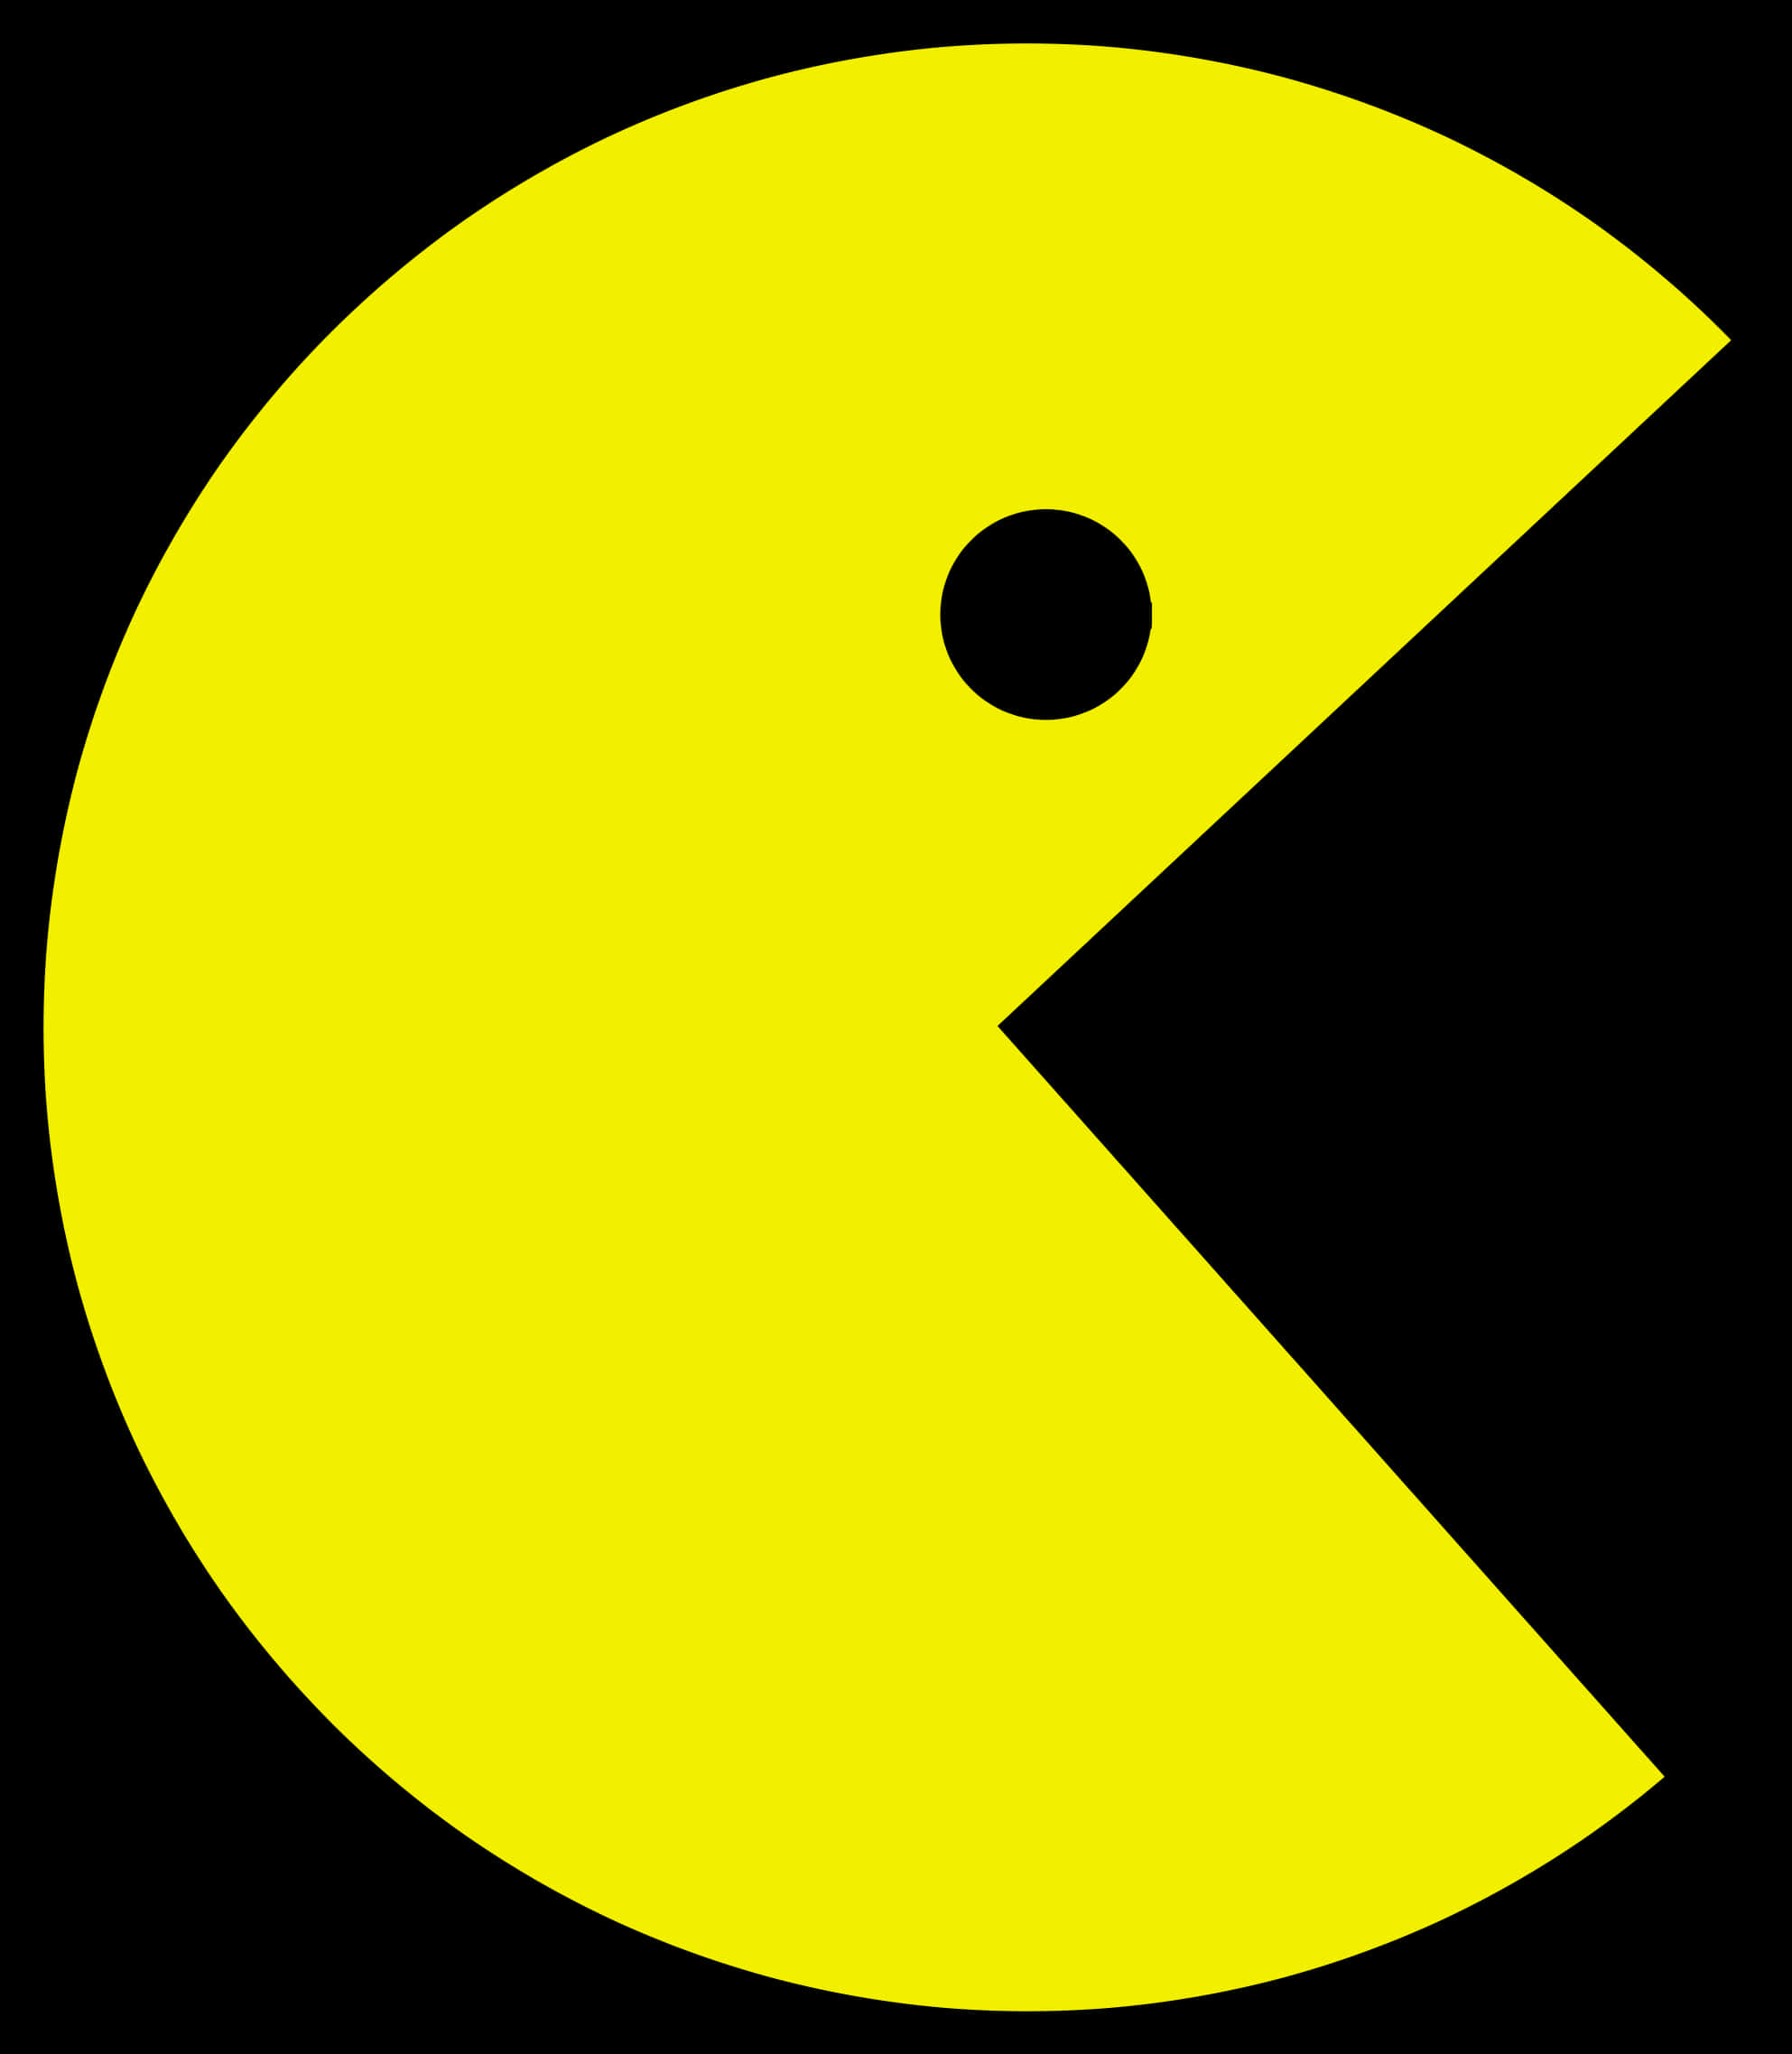 Iconic Pacman Graphic PNG image